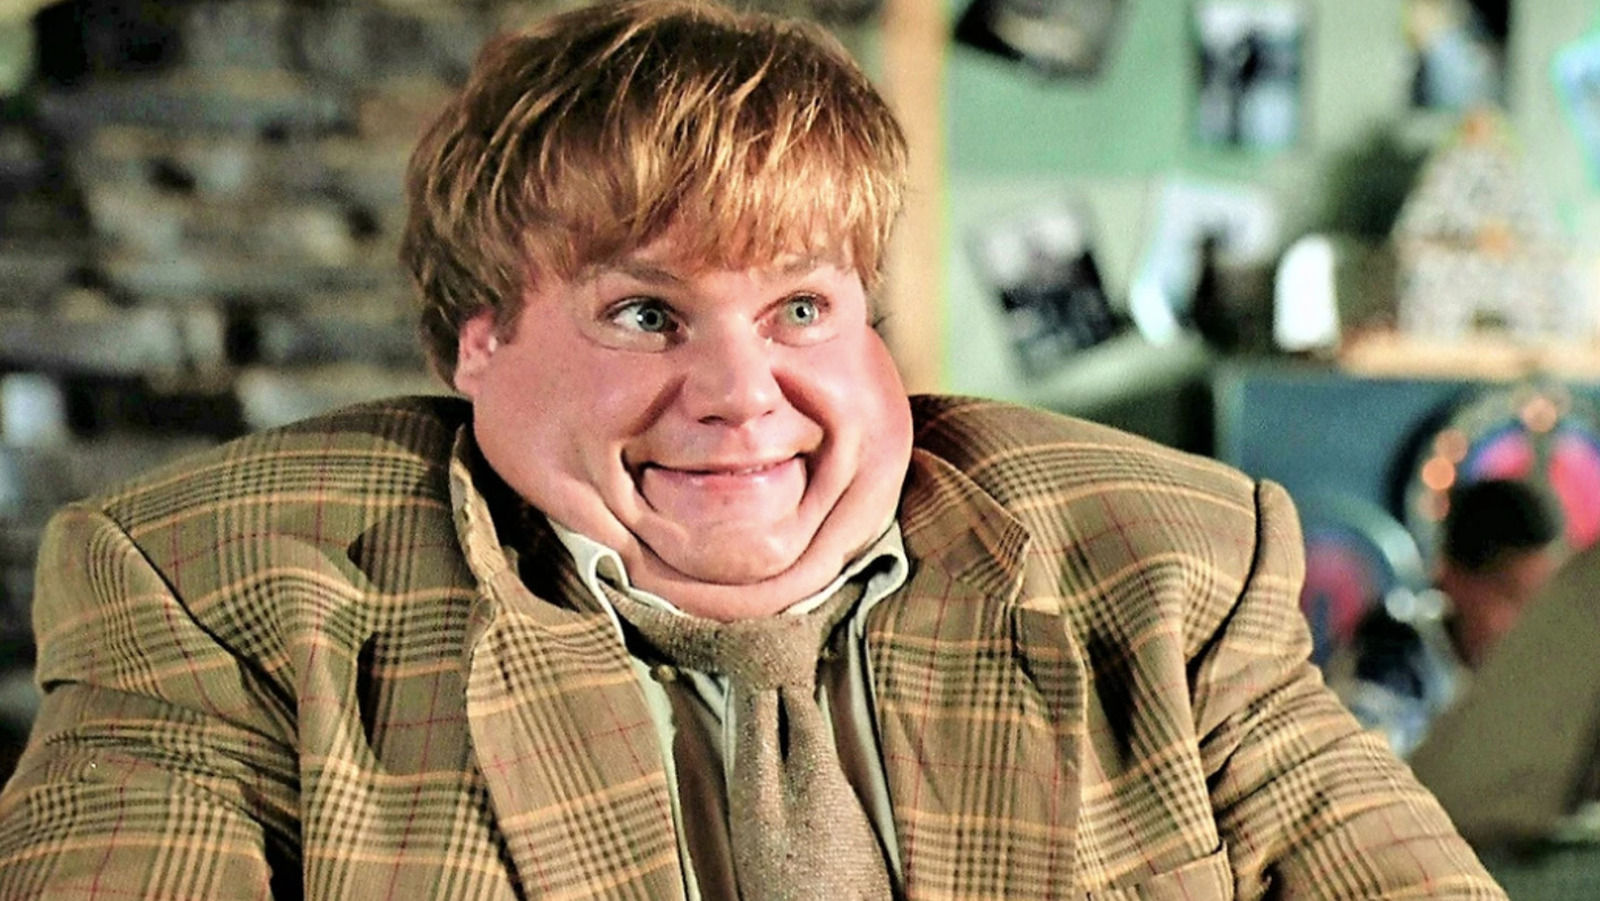 I think of Chris Farley. His SNL career started in 92(?), and his real break came with Tommy Boy in '94. Dead by '98 at 33 years old. Horribly addicted to drugs, alcohol, food, and other impulse-related stuff probably. Probably gained 100 lbs in his 6 year run. OD'd on a "speedball" (as everyone seems to) Everybody of that era claims he was the funniest guy they've ever known, and most of them talk about being frustrated both by his lack of any self-worth (despite how beloved he was), and a feeling of "inevitability" about his early demise.
<br/<br/>
 Obviously, Chris wasn't destructive like some of the other scumbags mentioned on this thing. He was simply self-destructive. People like to compare him to John Belushi. They had pretty much the same self-destructive trajectories, both fat dudes, both highly energetic performers. But as people, I think they were very different. I think he's more comparable to Robin Williams. They both had this like insatiable need to make people laugh, and they both had this super-human energy. By all accounts, Chris, like Robin, was an incredibly sweet and sensitive person in private life. Apparently, he'd spend a lot of time volunteering at children's hospitals in Madison Wisconsin, and he didn't even talk about it. I've heard a million takes on Farley, and it's always heartbreaking (and telling that 25 years later, people still talk about it and can't get over it). u/conradbirdiebird